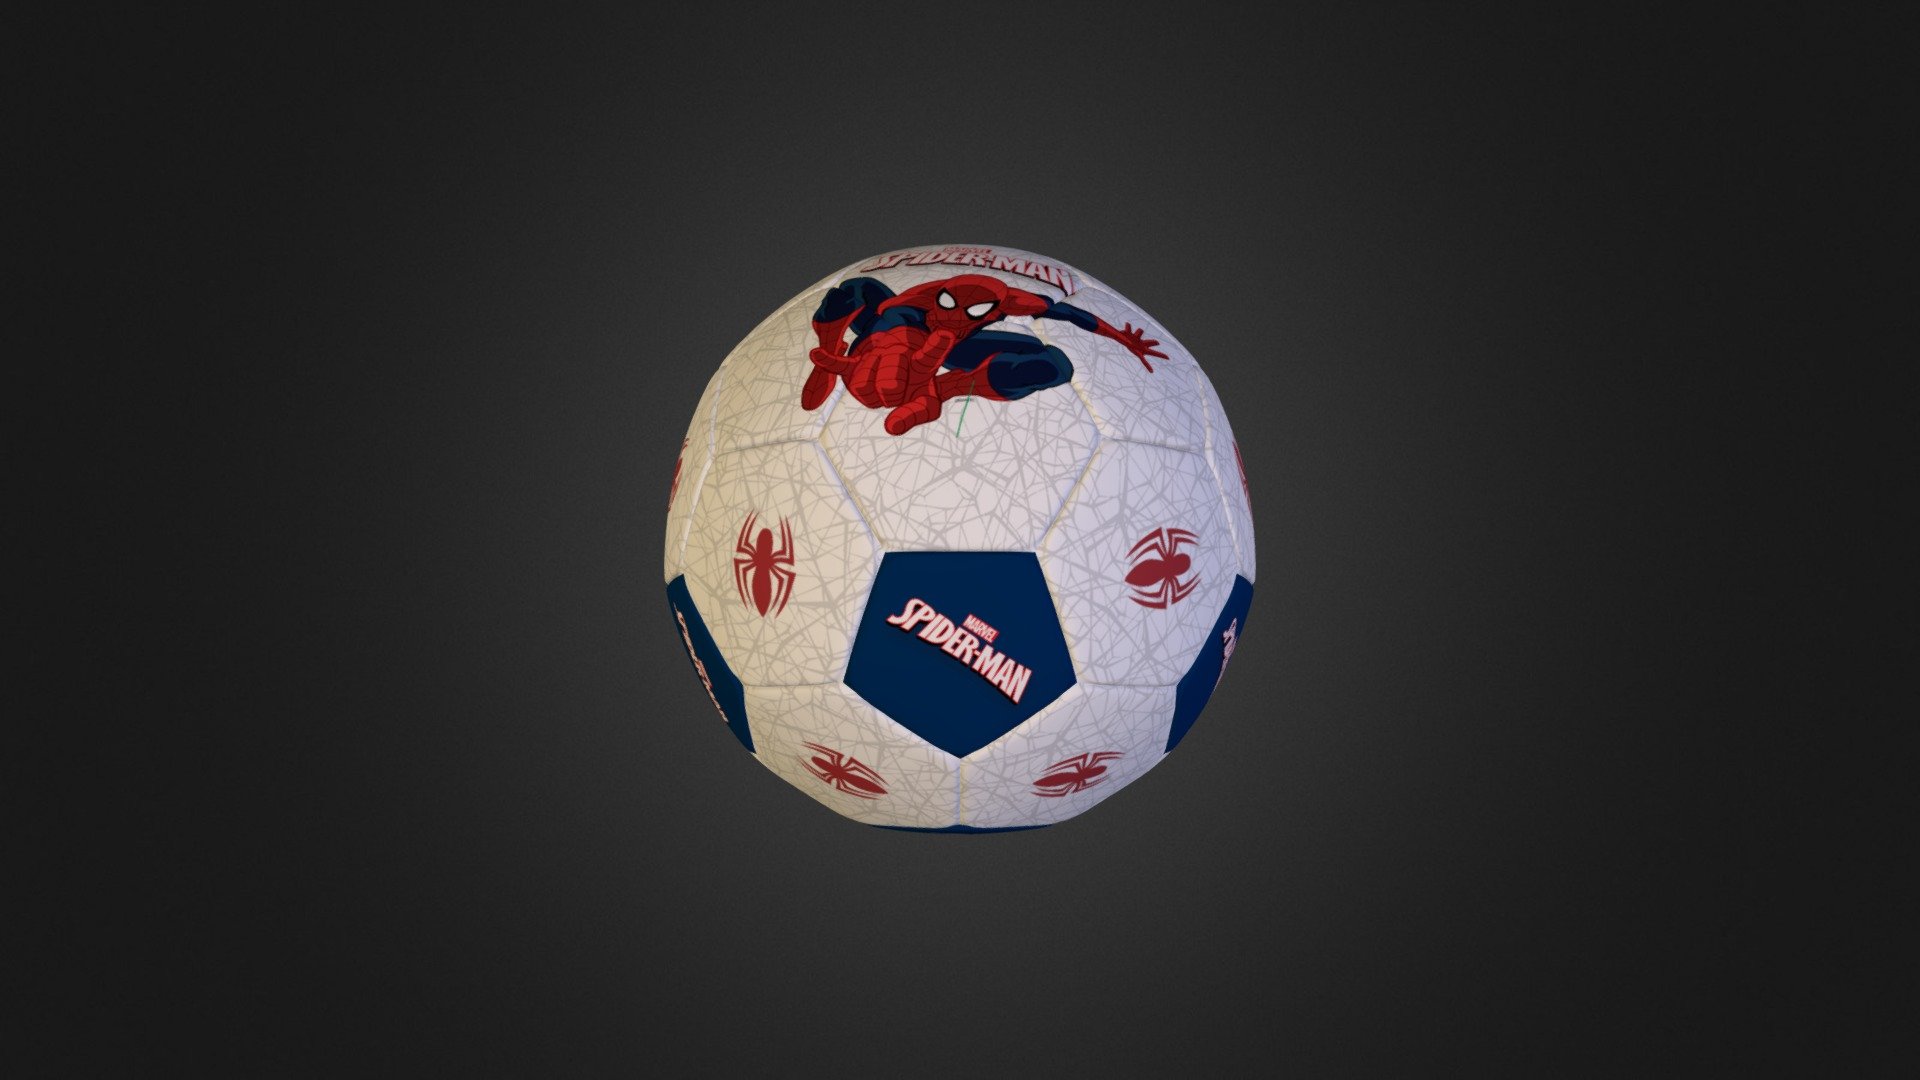 Spiderman Soccer ball - Spiderman Soccer ball - 3D model by mmaholdings 3d model